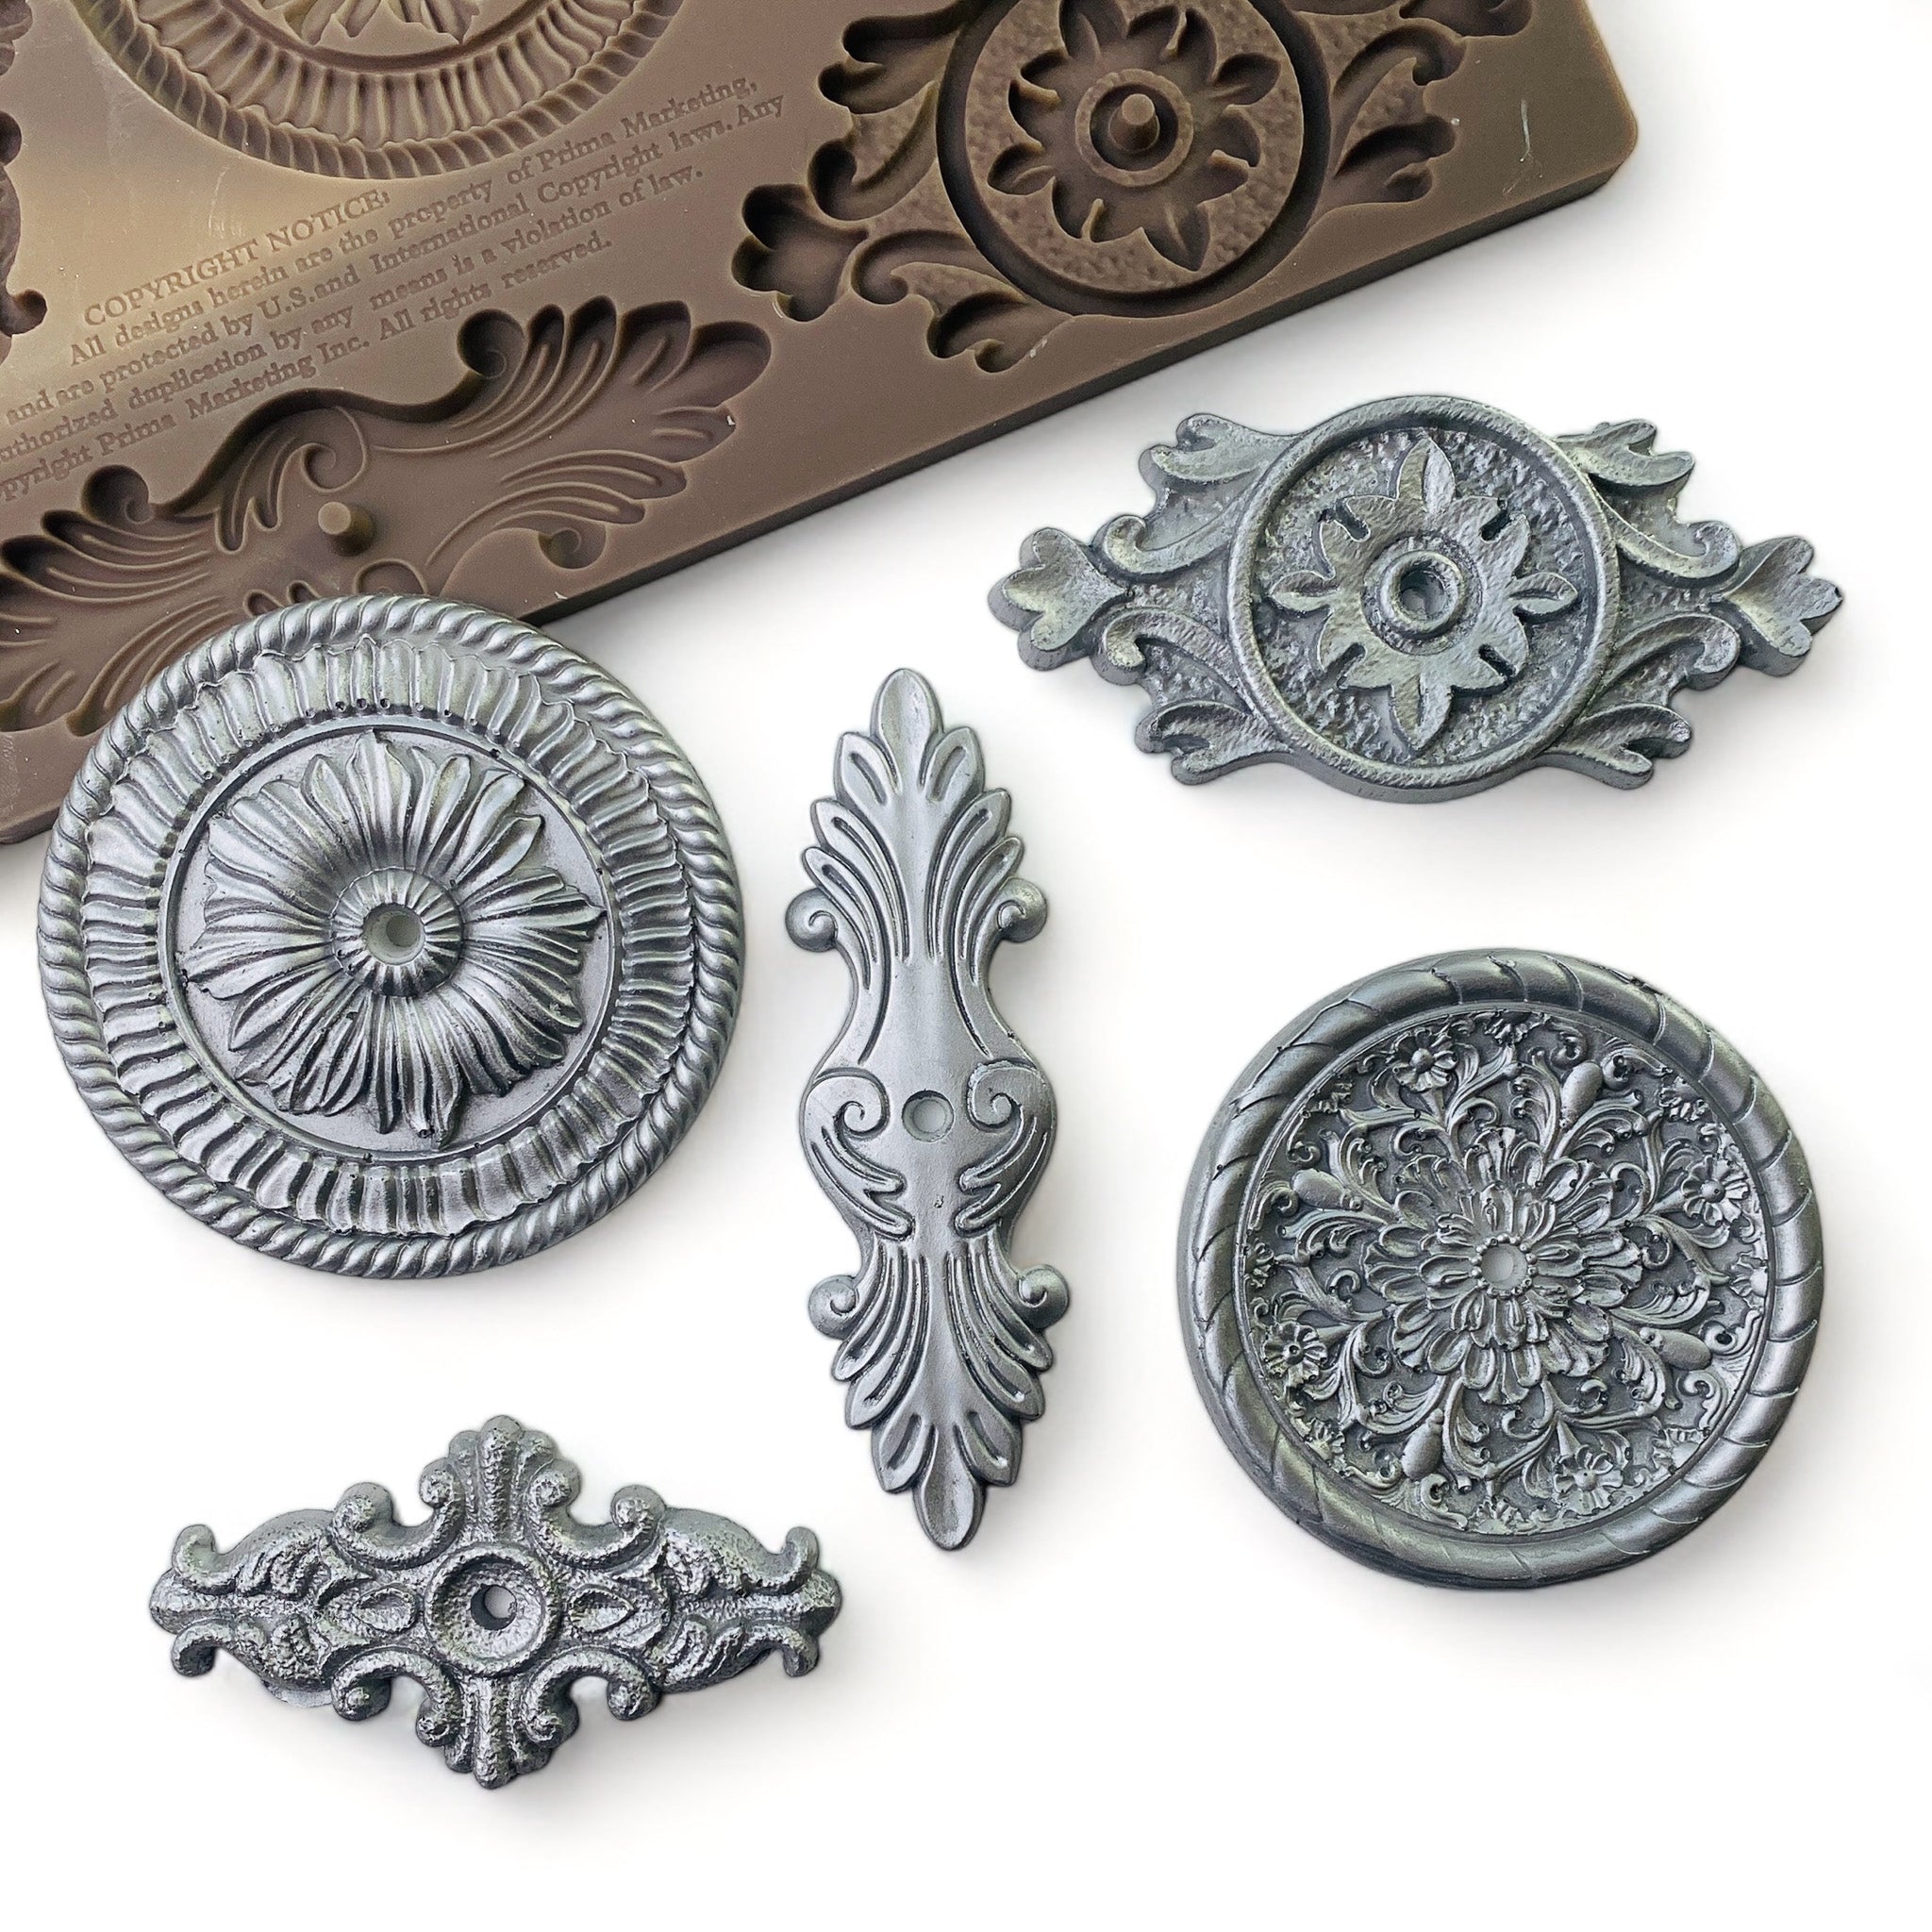 Silver colored silicone mold castings of 5 ornate drawer pull plates are against a white background.